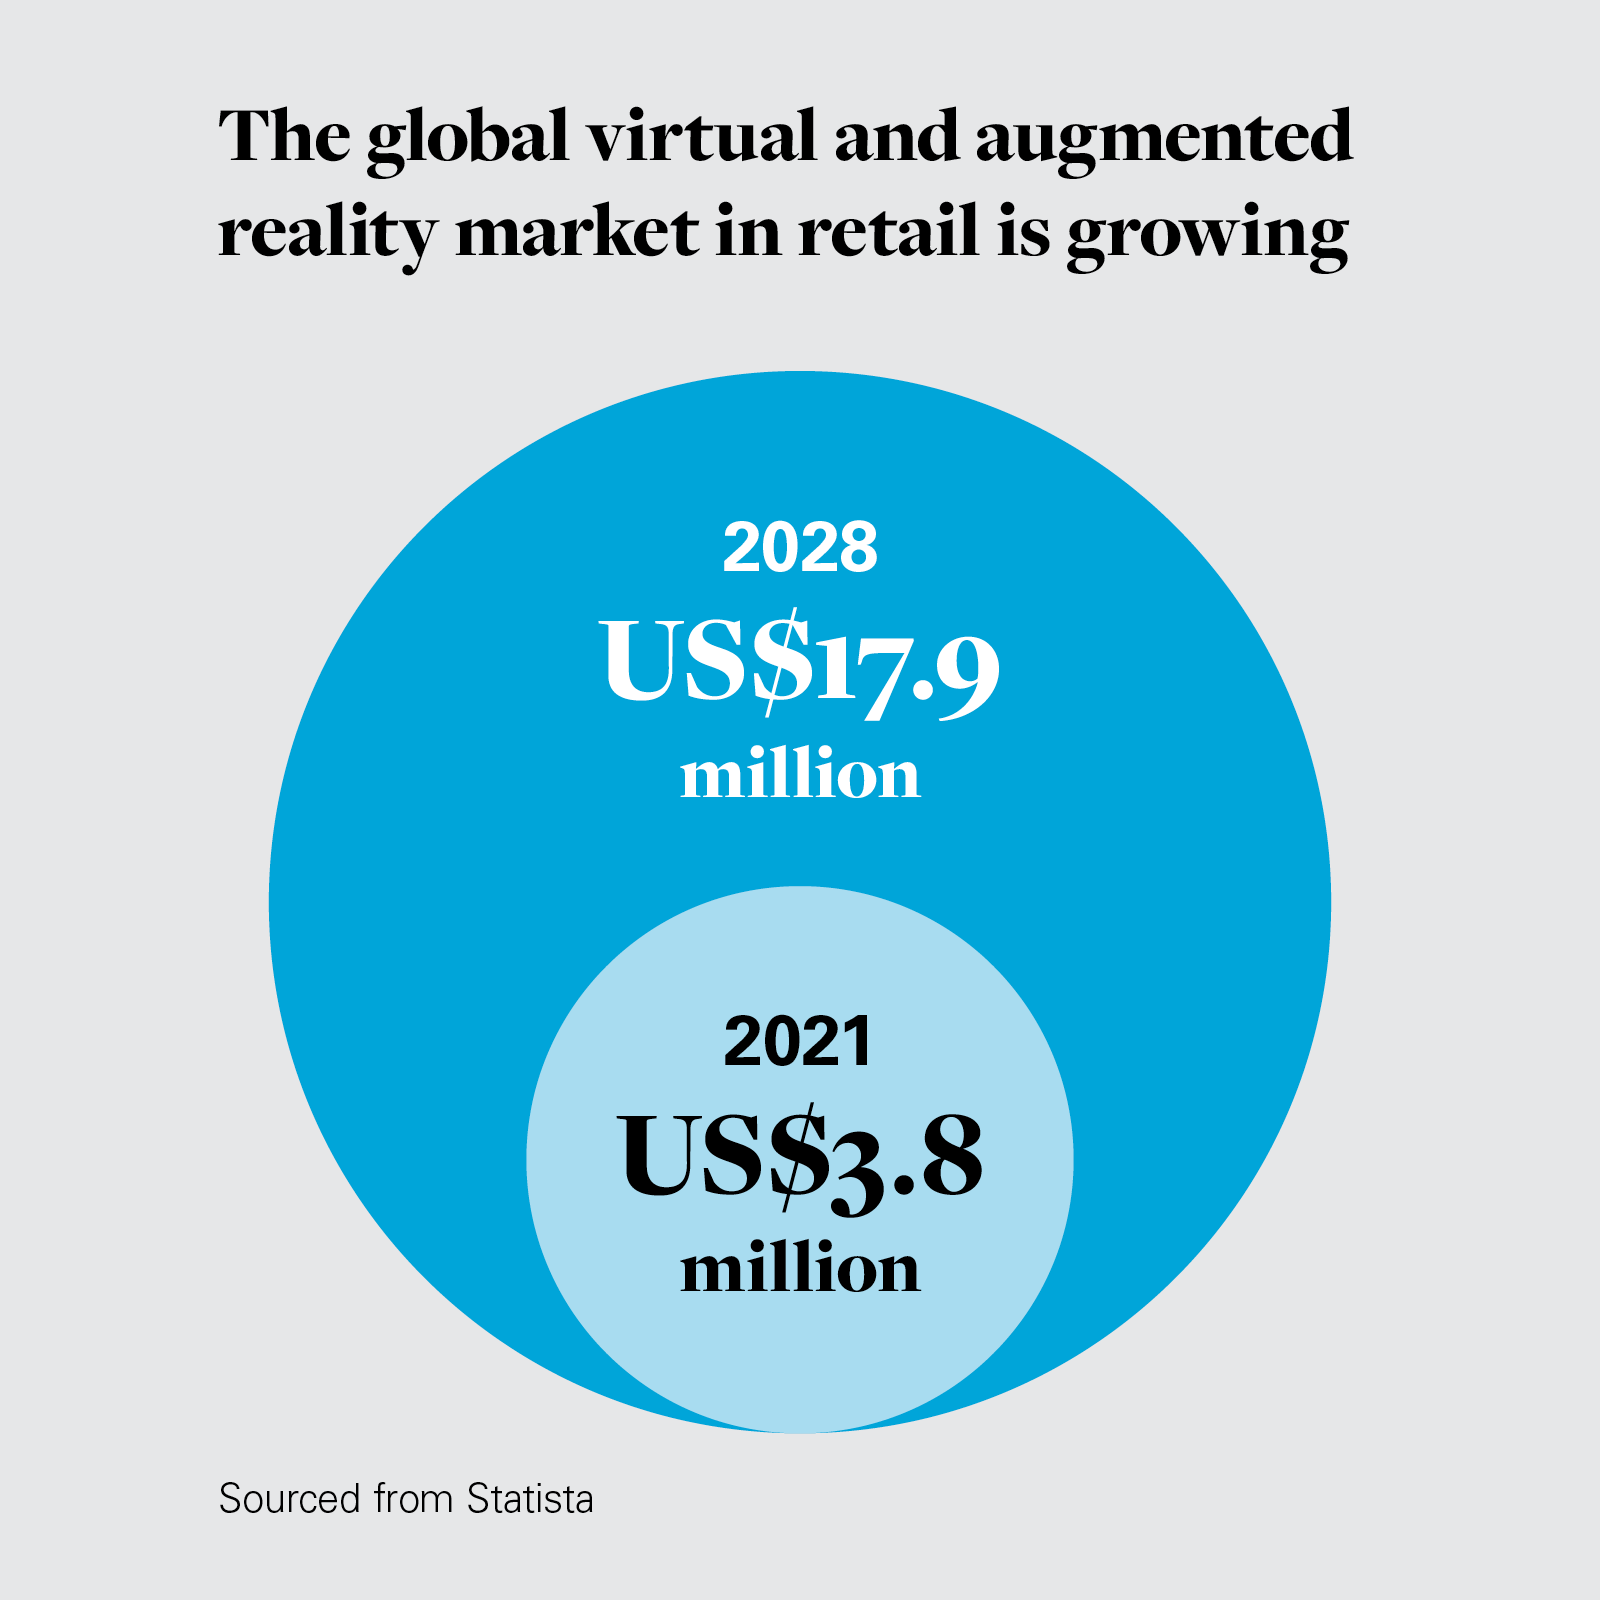 The global virtual and augmented reality market in retail is growing